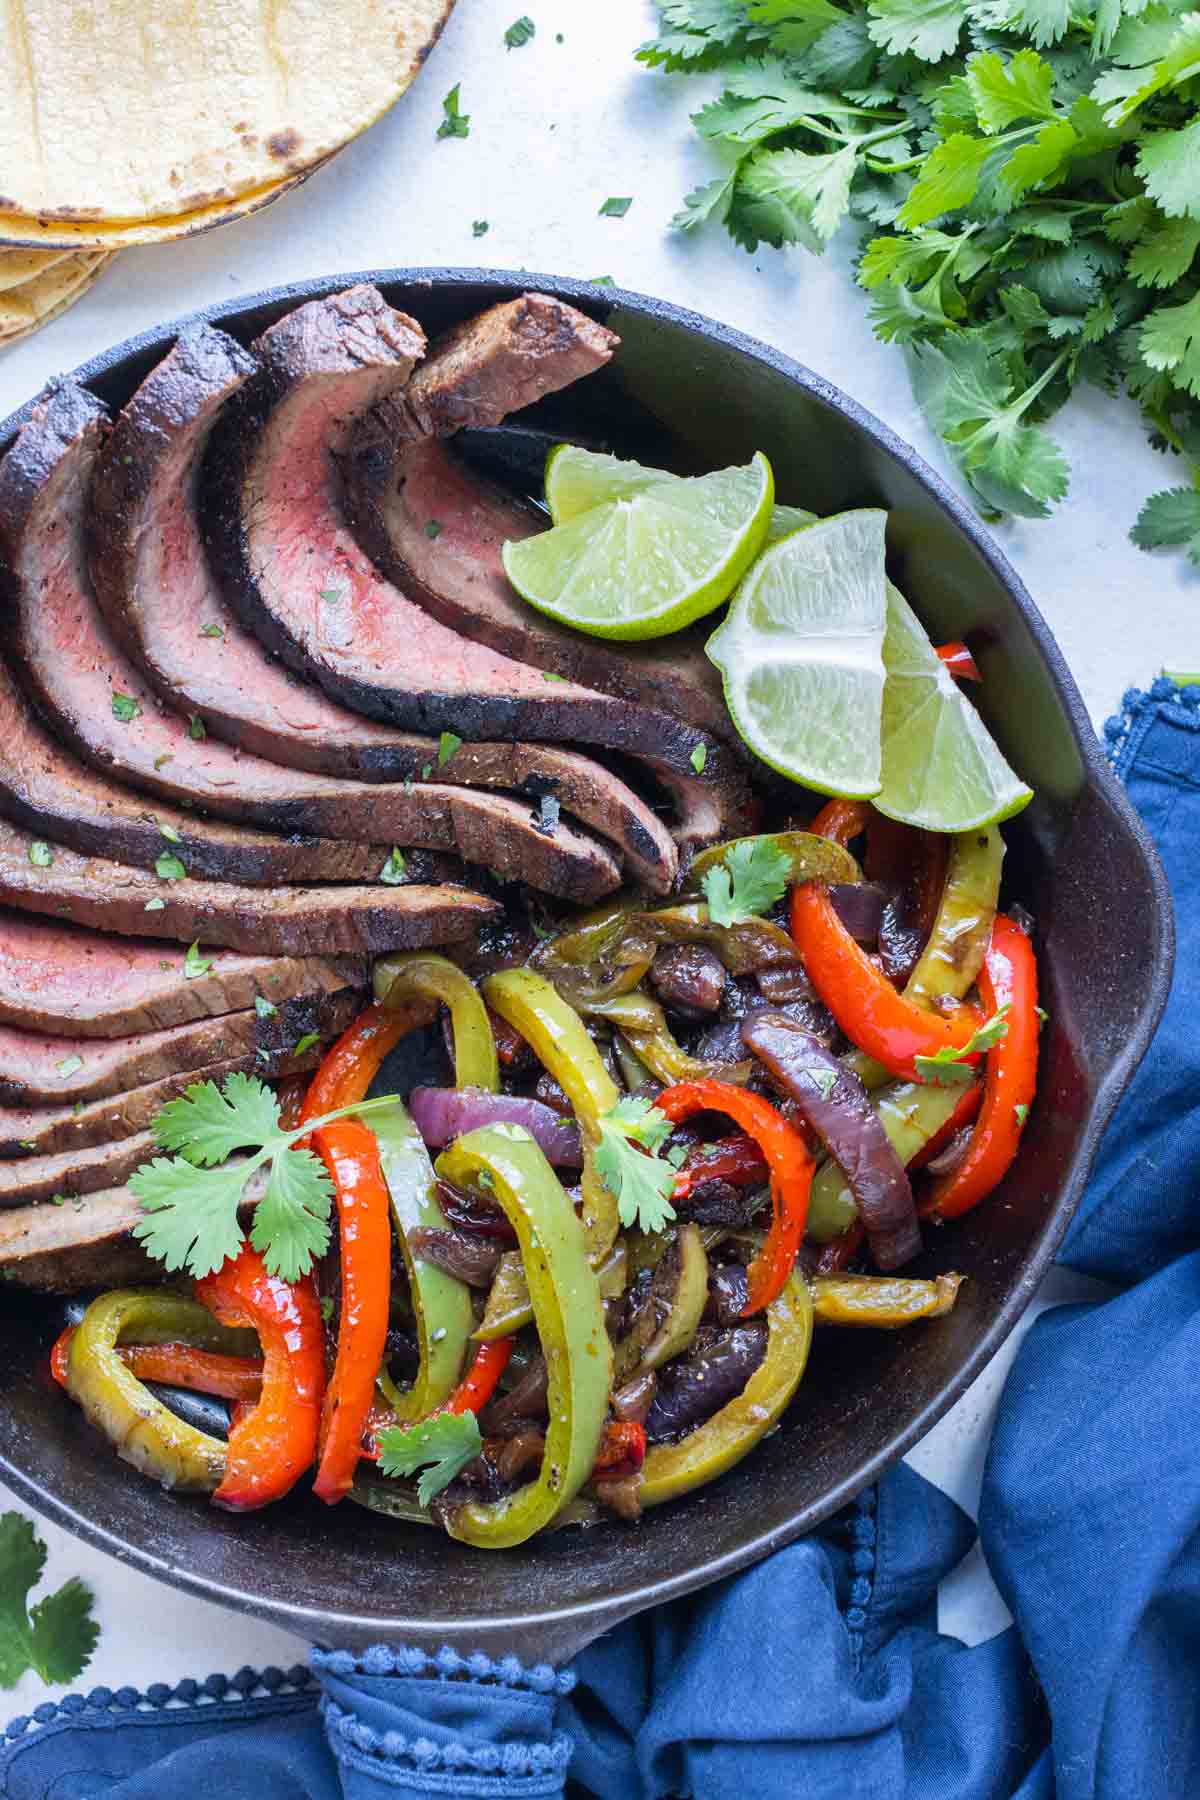 The steak fajitas and vegetables are served in a bowl.